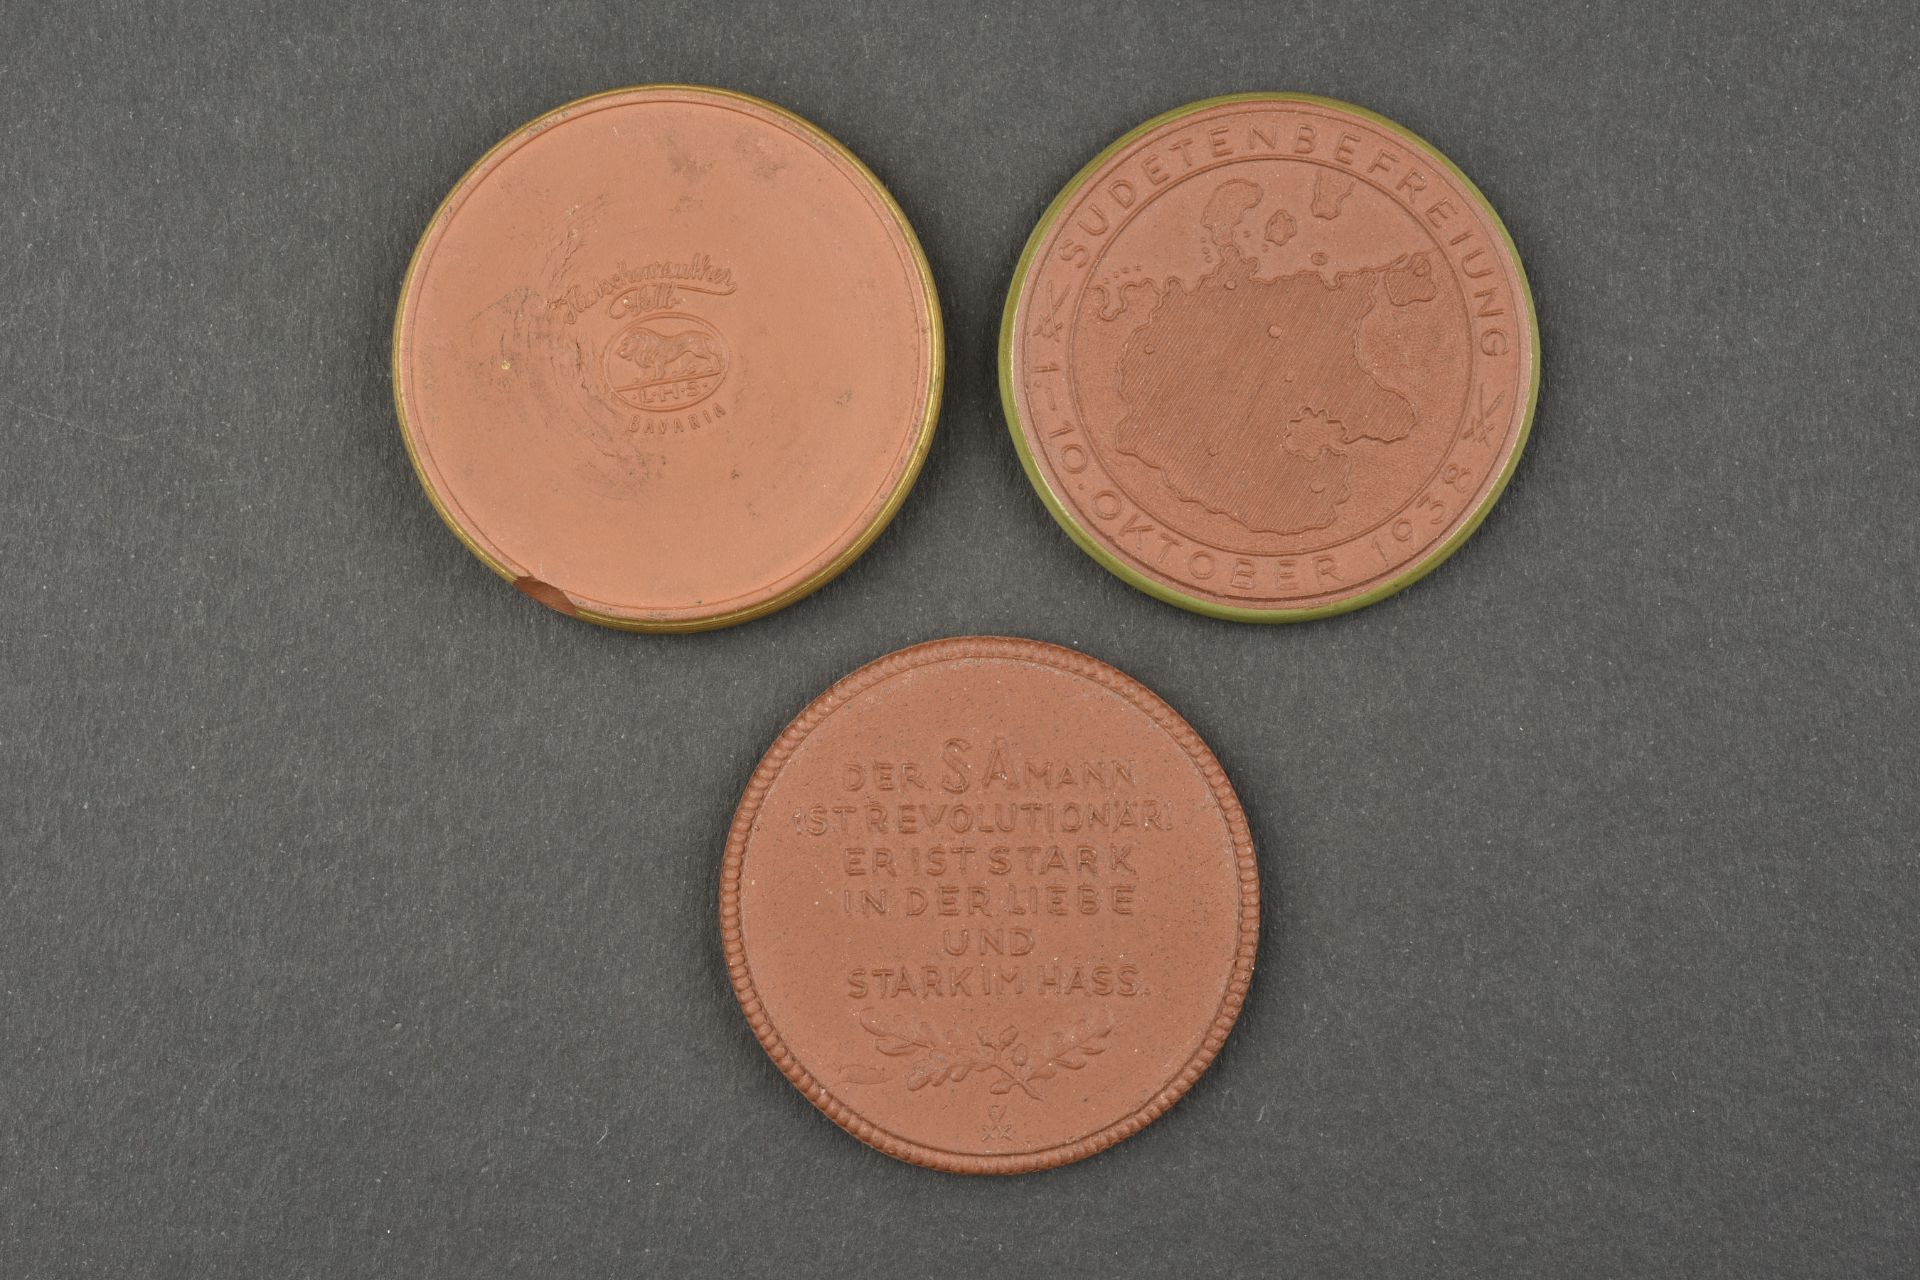 Medailles commemoratives. Commemorative medals. - Image 2 of 2